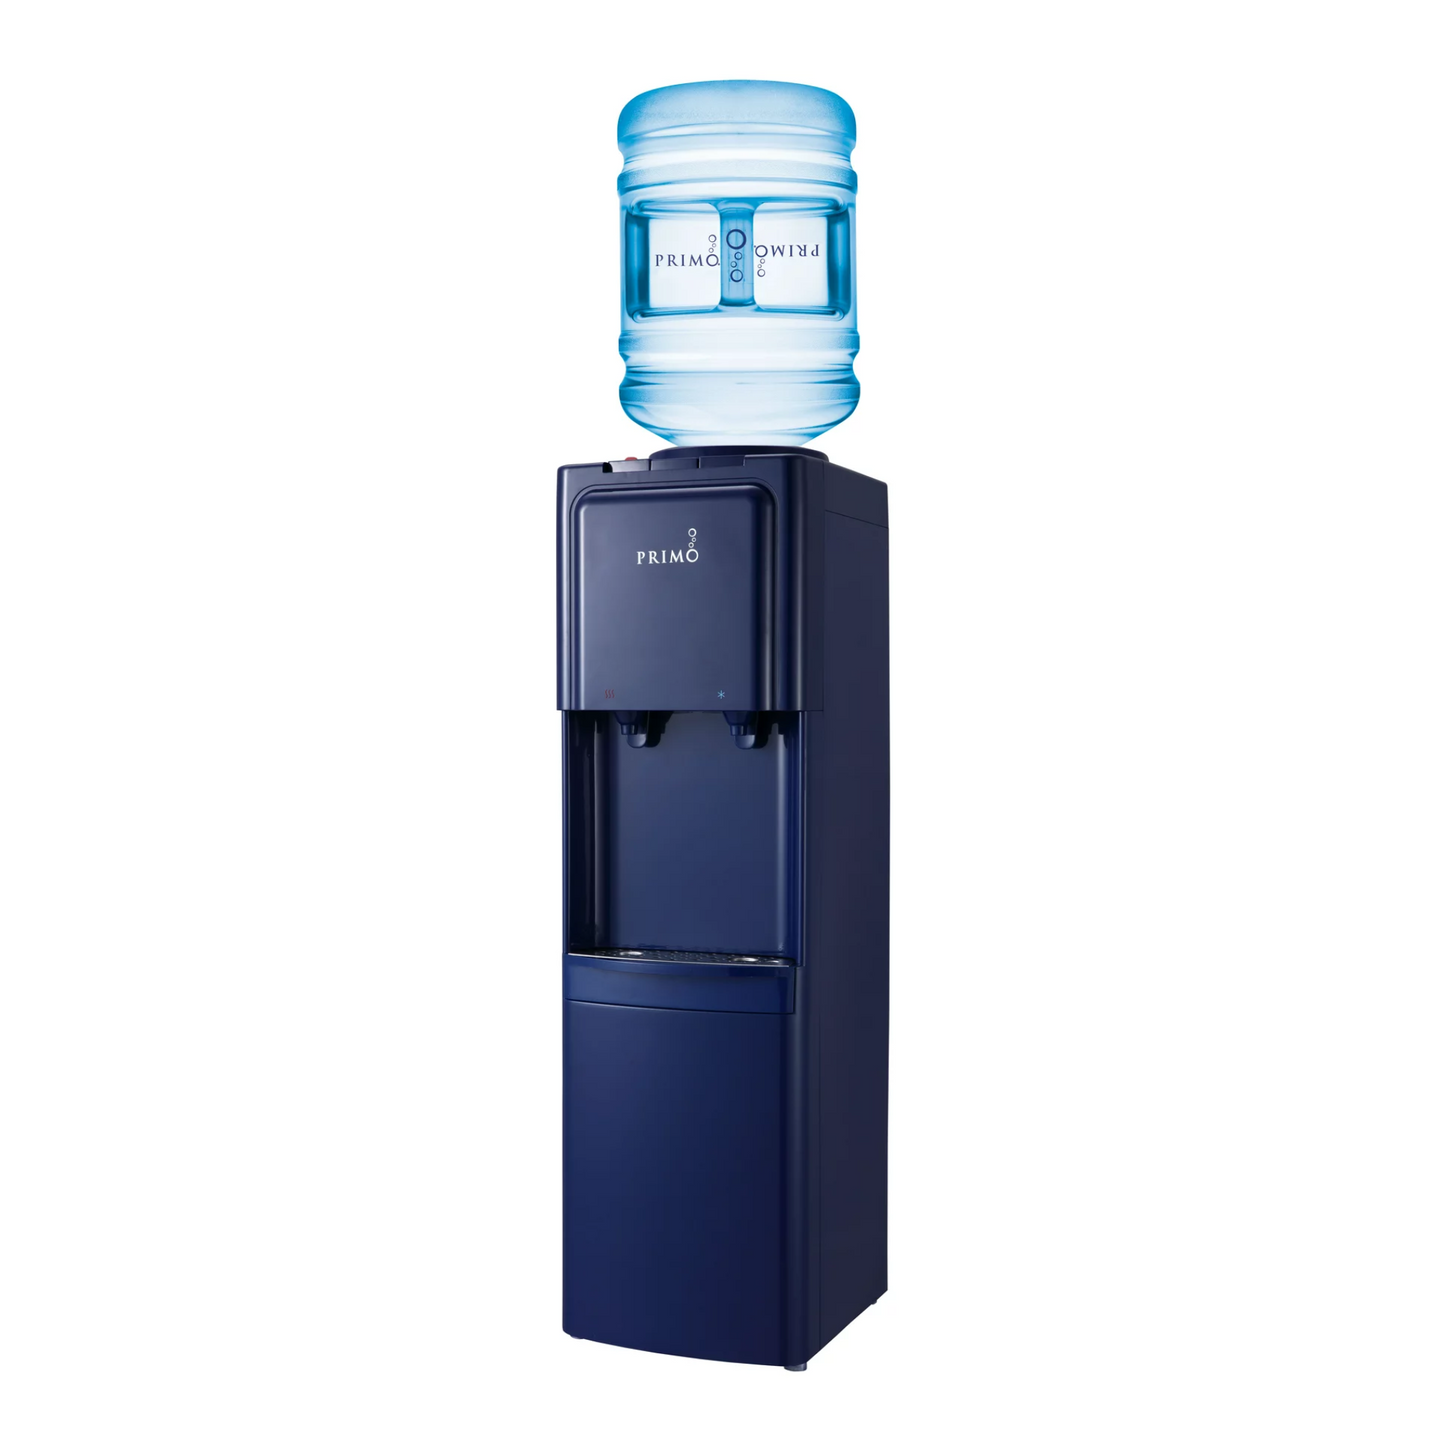 Navy Primo Top Loading Hot and Cold Water Cooler Dispenser for Home or Office